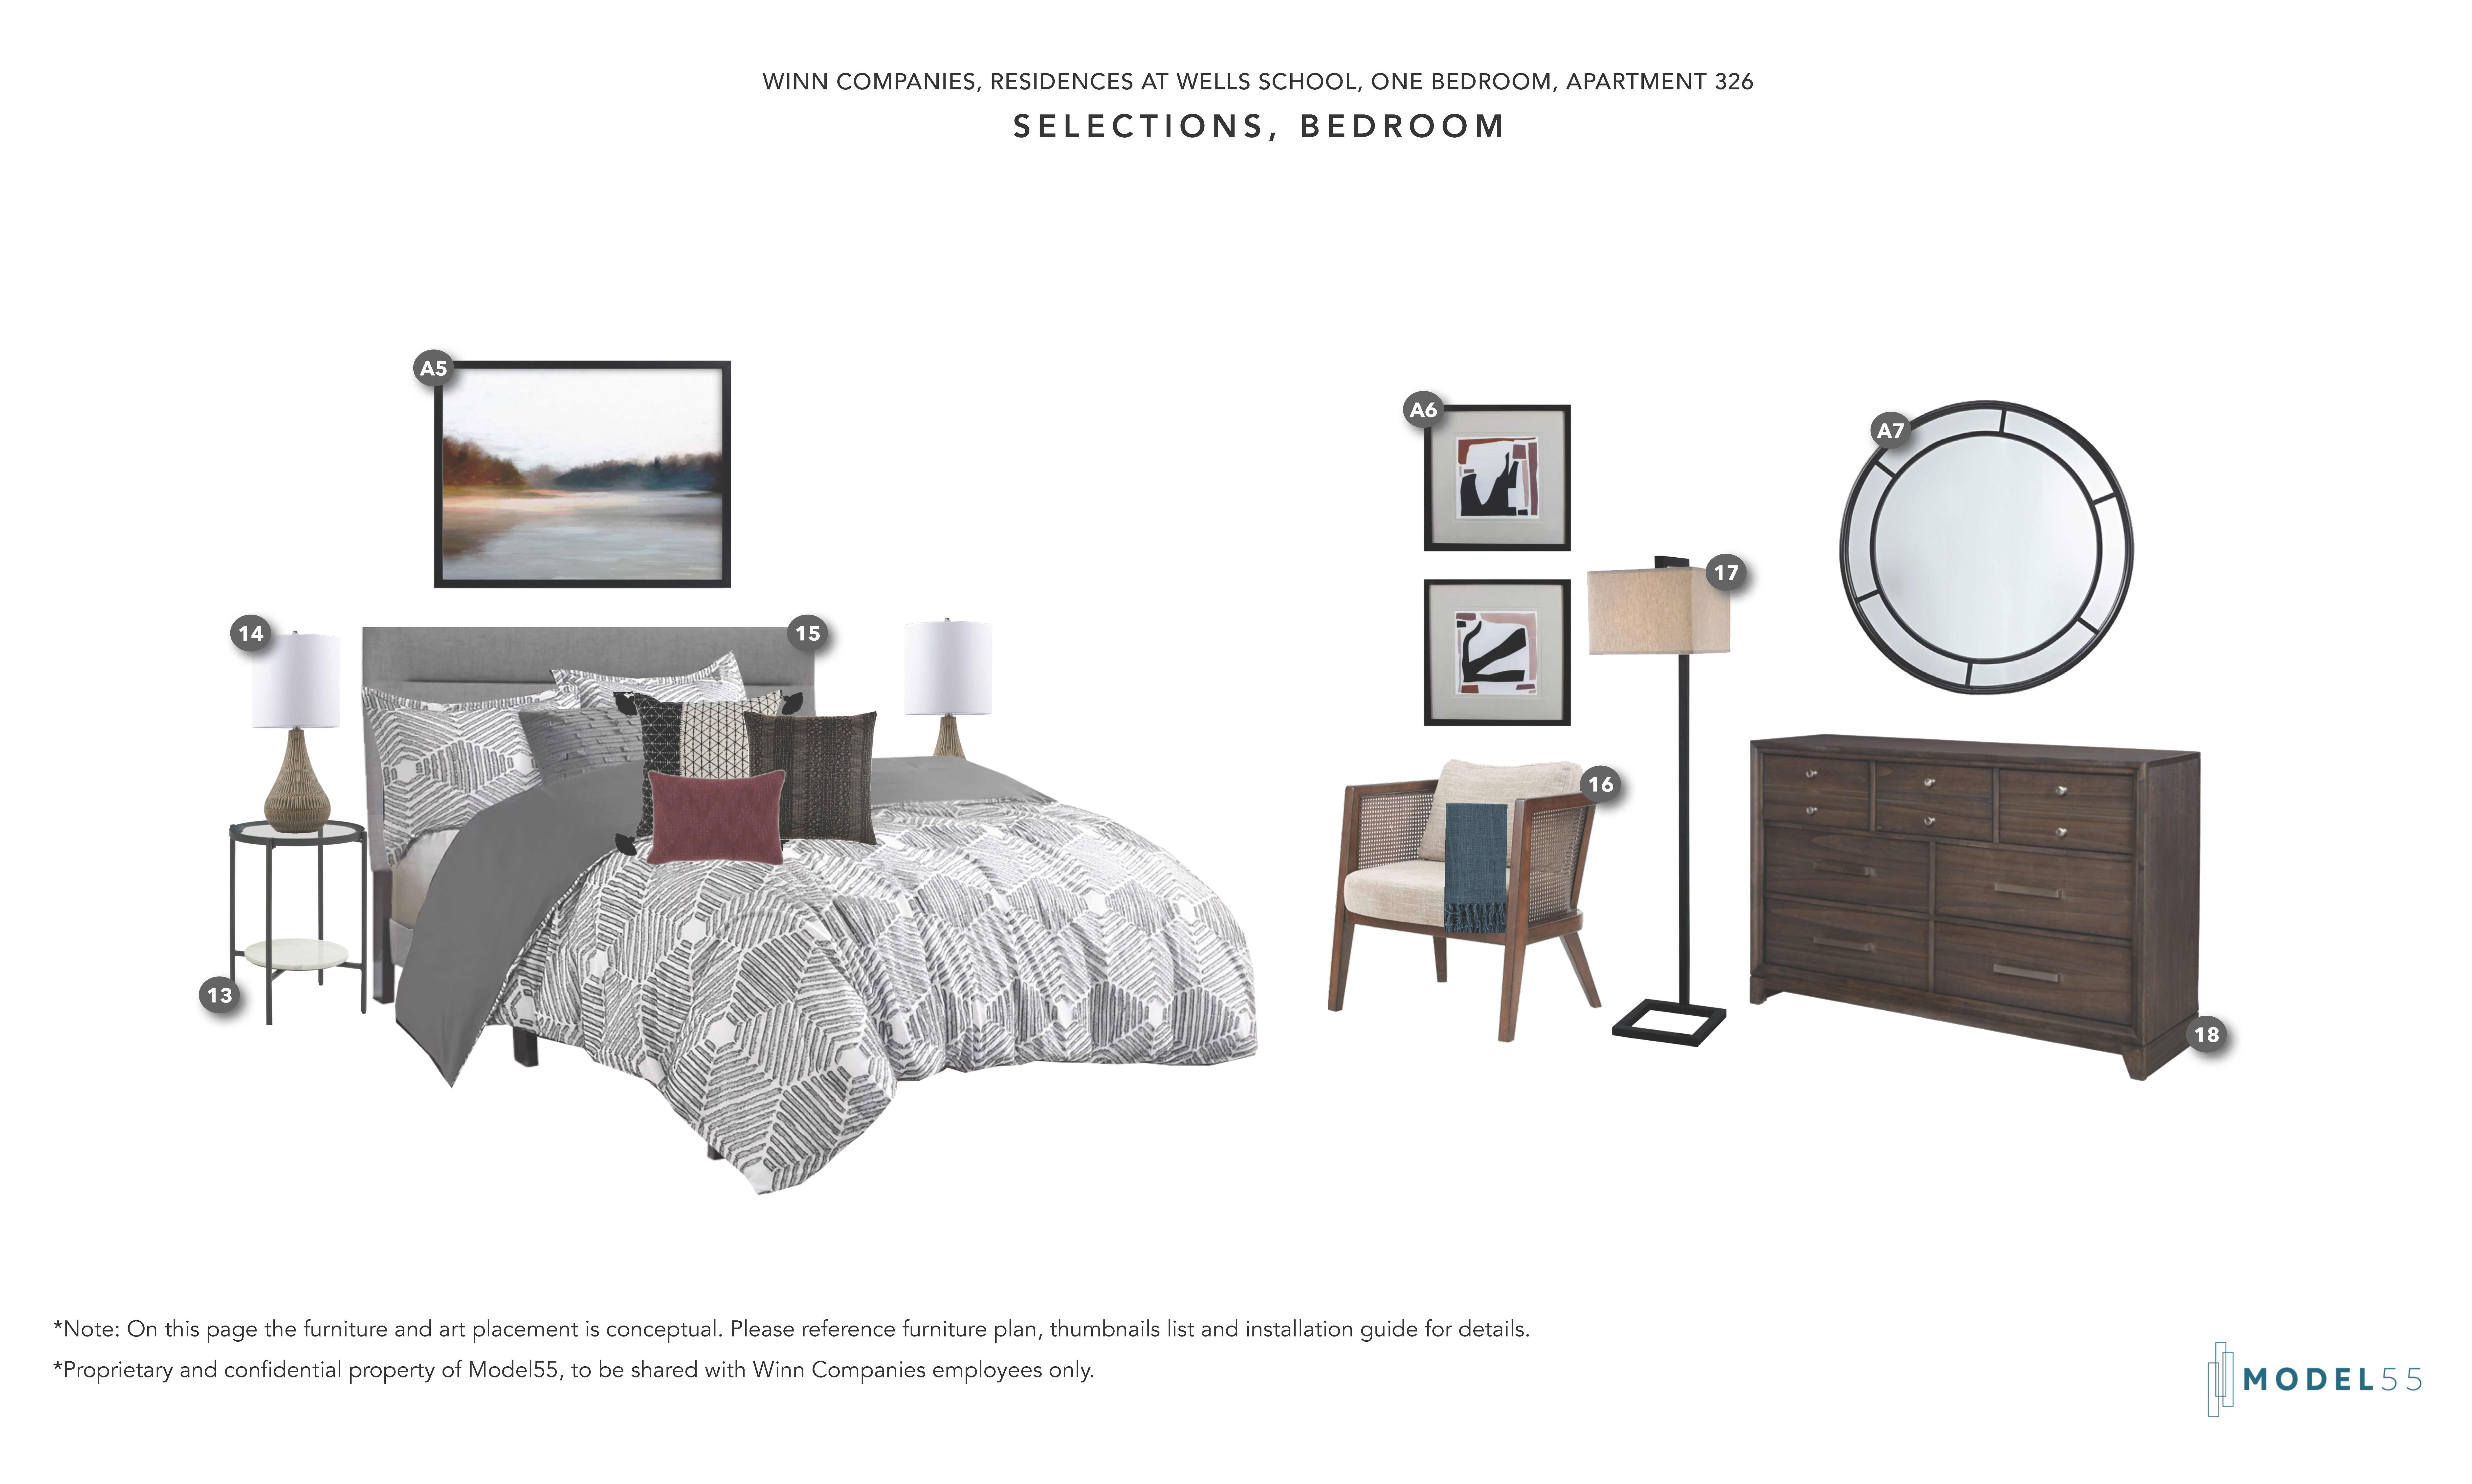 Winn Companies Selection for One Bedroom Apartment Bedroom Space at Wells School